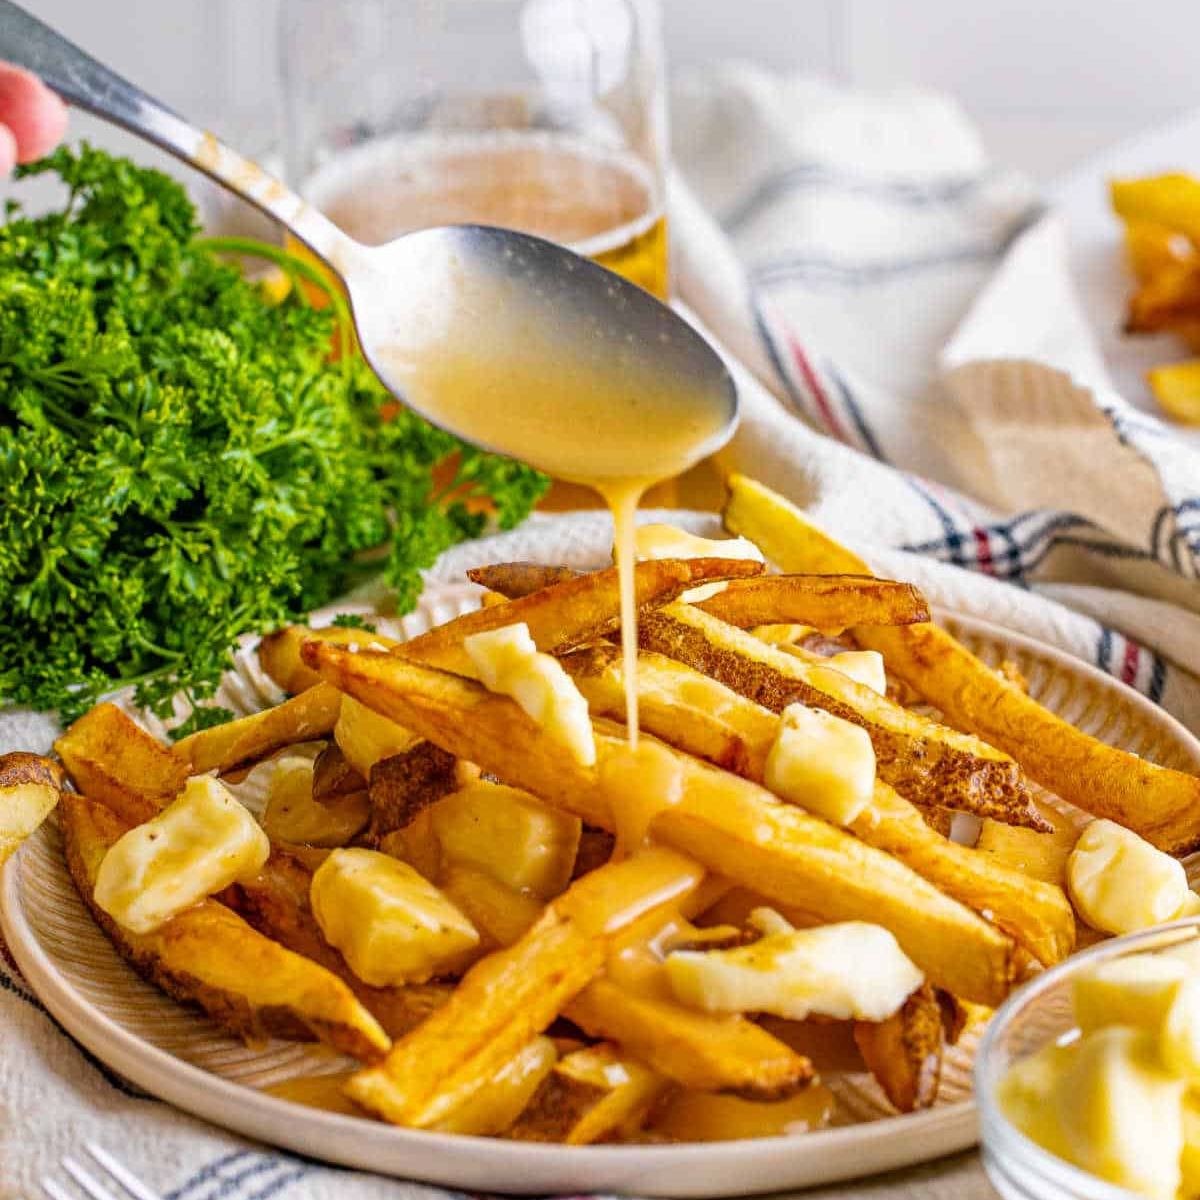 A plate filled with thick and crispy fries, drizzling with gravy for poutine fries.